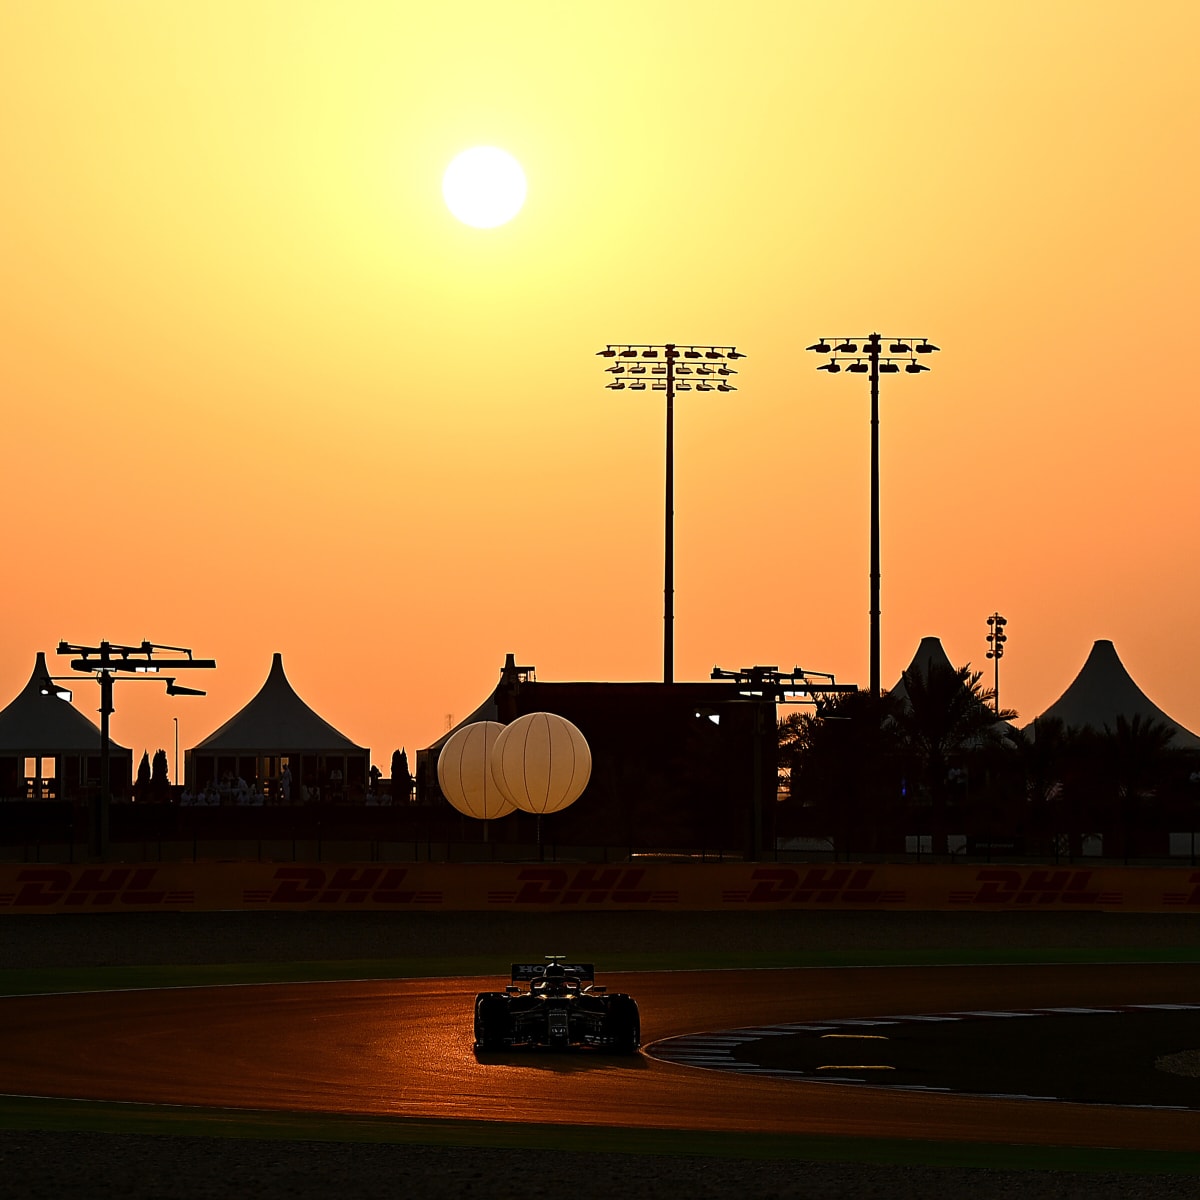 Qatar GP When And How To Watch Qualifying